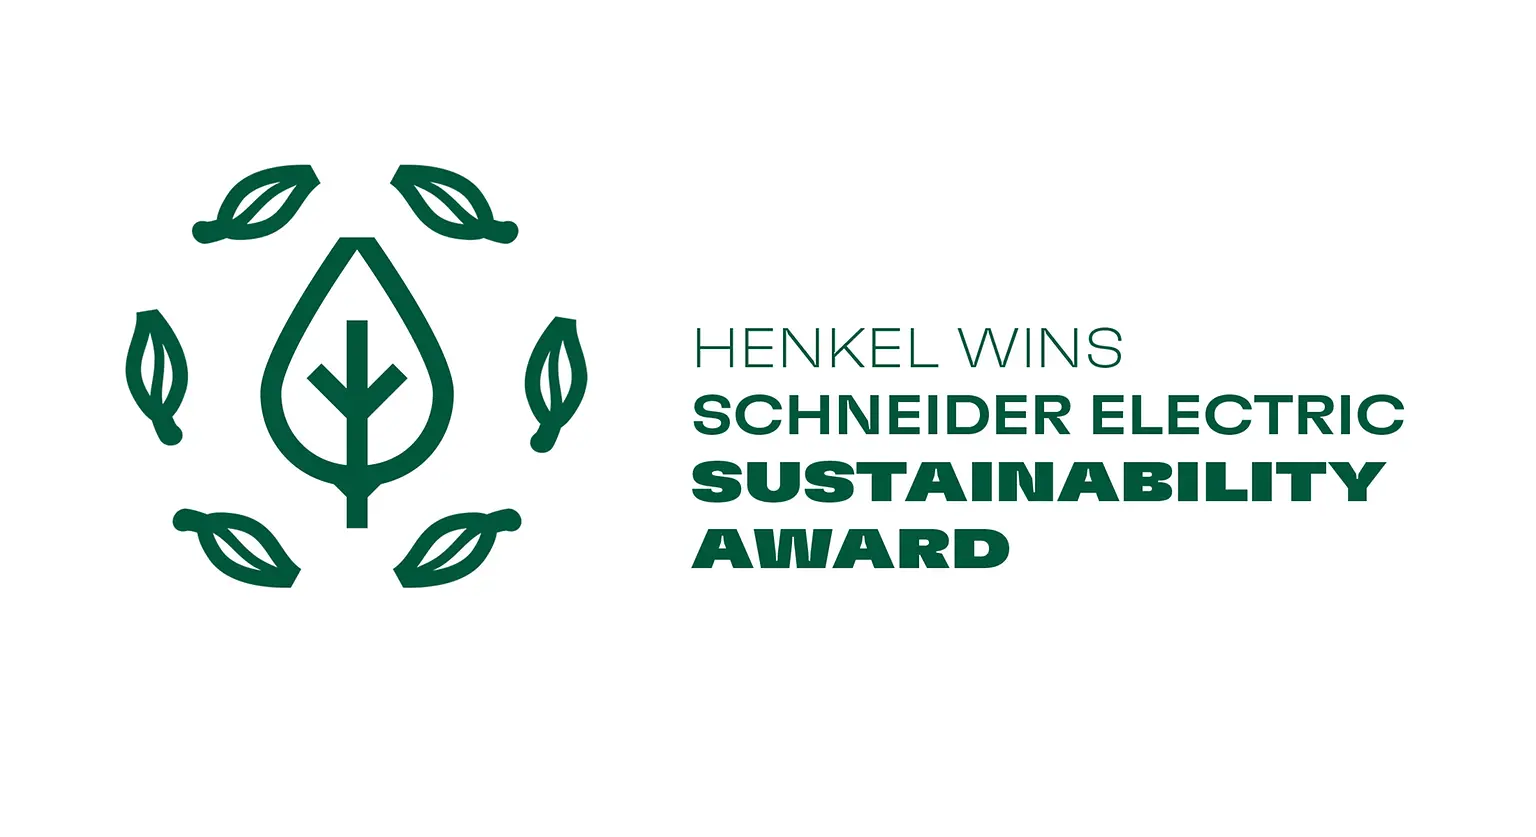 
Henkel has been recognized with the prestigious Schneider Electric Sustainability Award